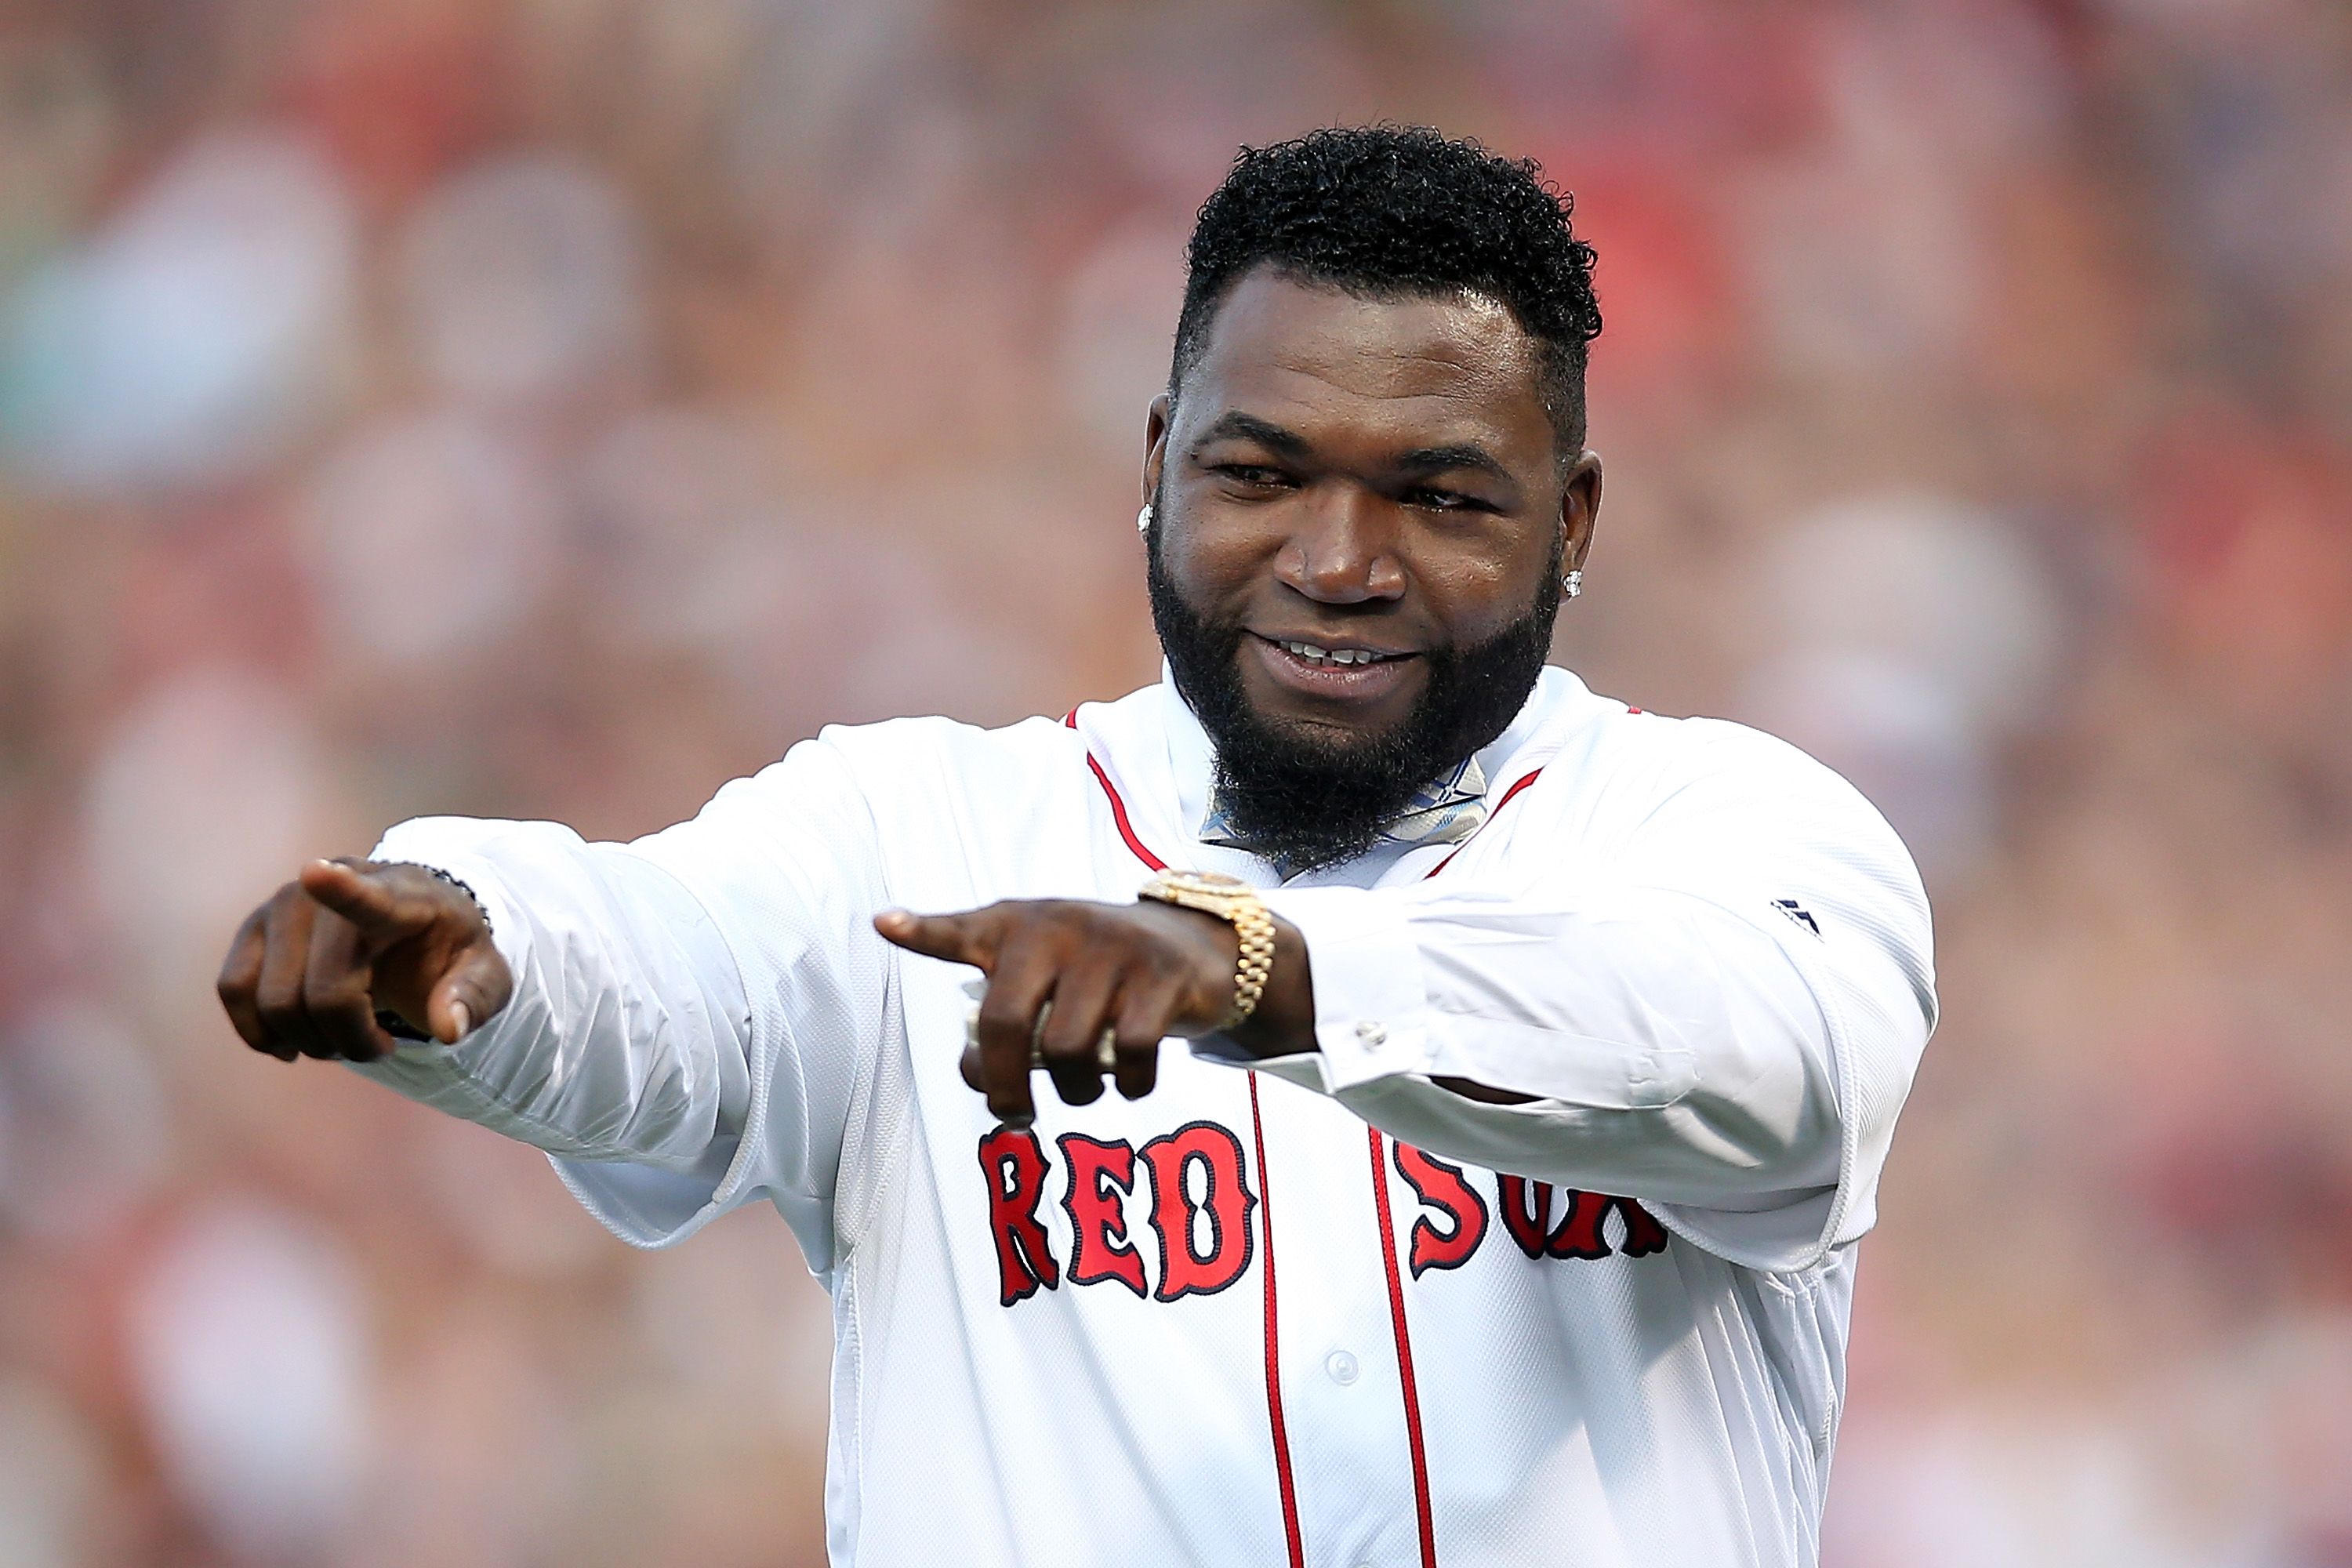 David Ortiz estate sale poll: What's the weirdest item up for grabs?